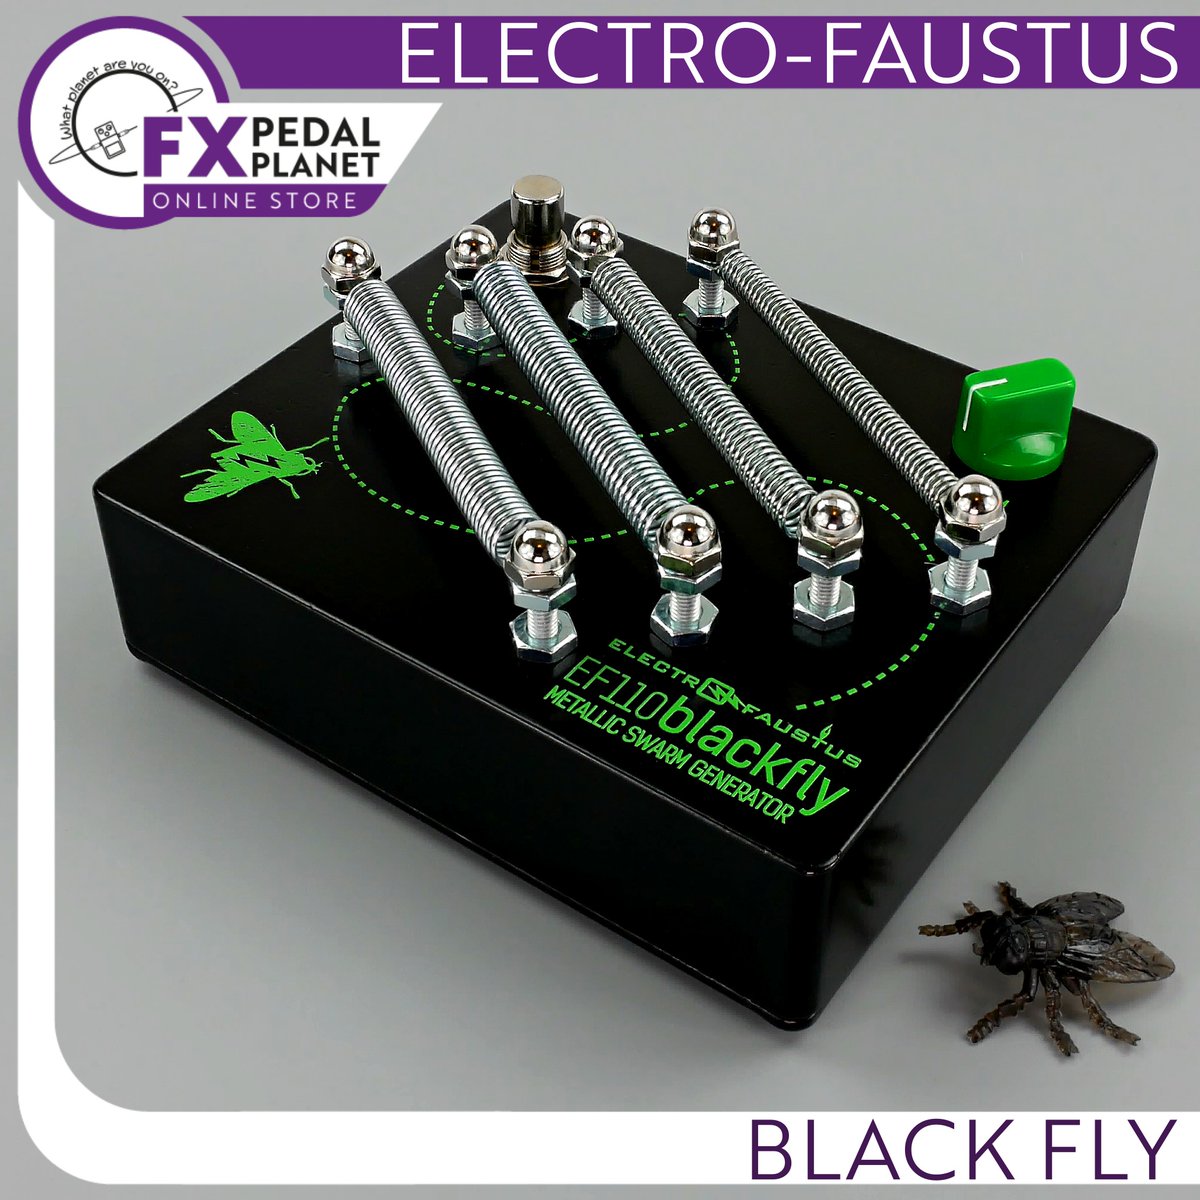 The @electrofaustus Blackfly is an innovative, spring activated instrument designed to offer a rich array of sonic textures. #FXPedalPlanetOnlineStore #ElectroFaustus #Blackfly #NoiseDevice